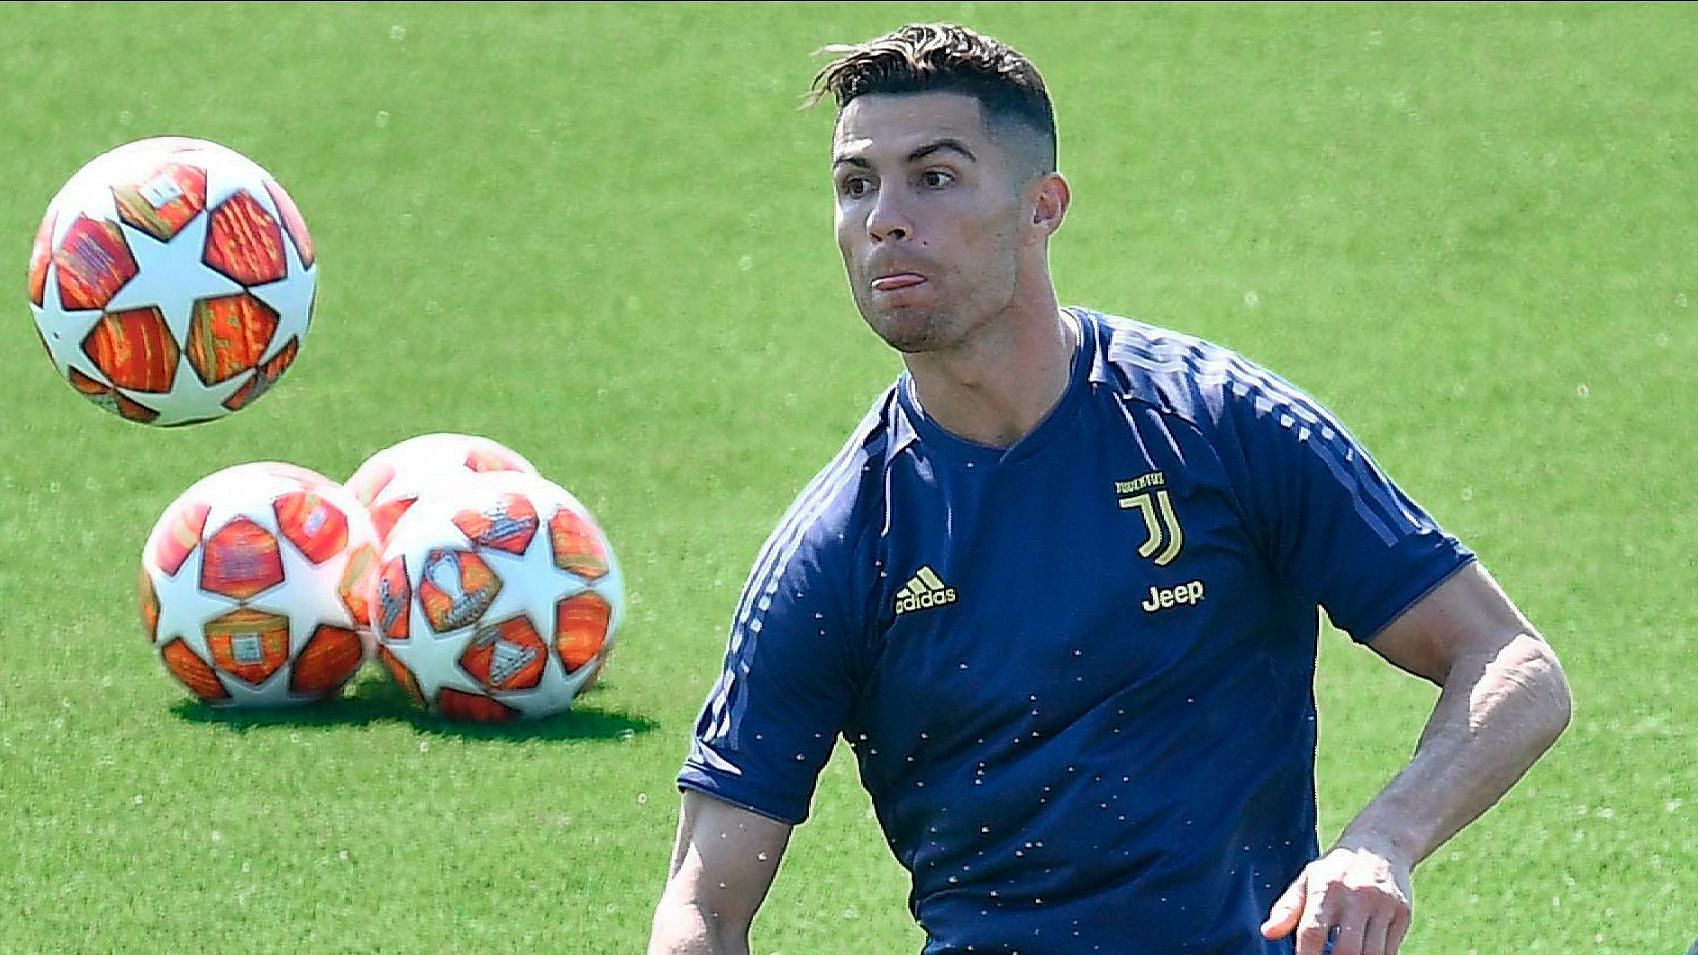 Cristiano Ronaldo during a training session ahead of his Champions League quarter-final match against Ajax.